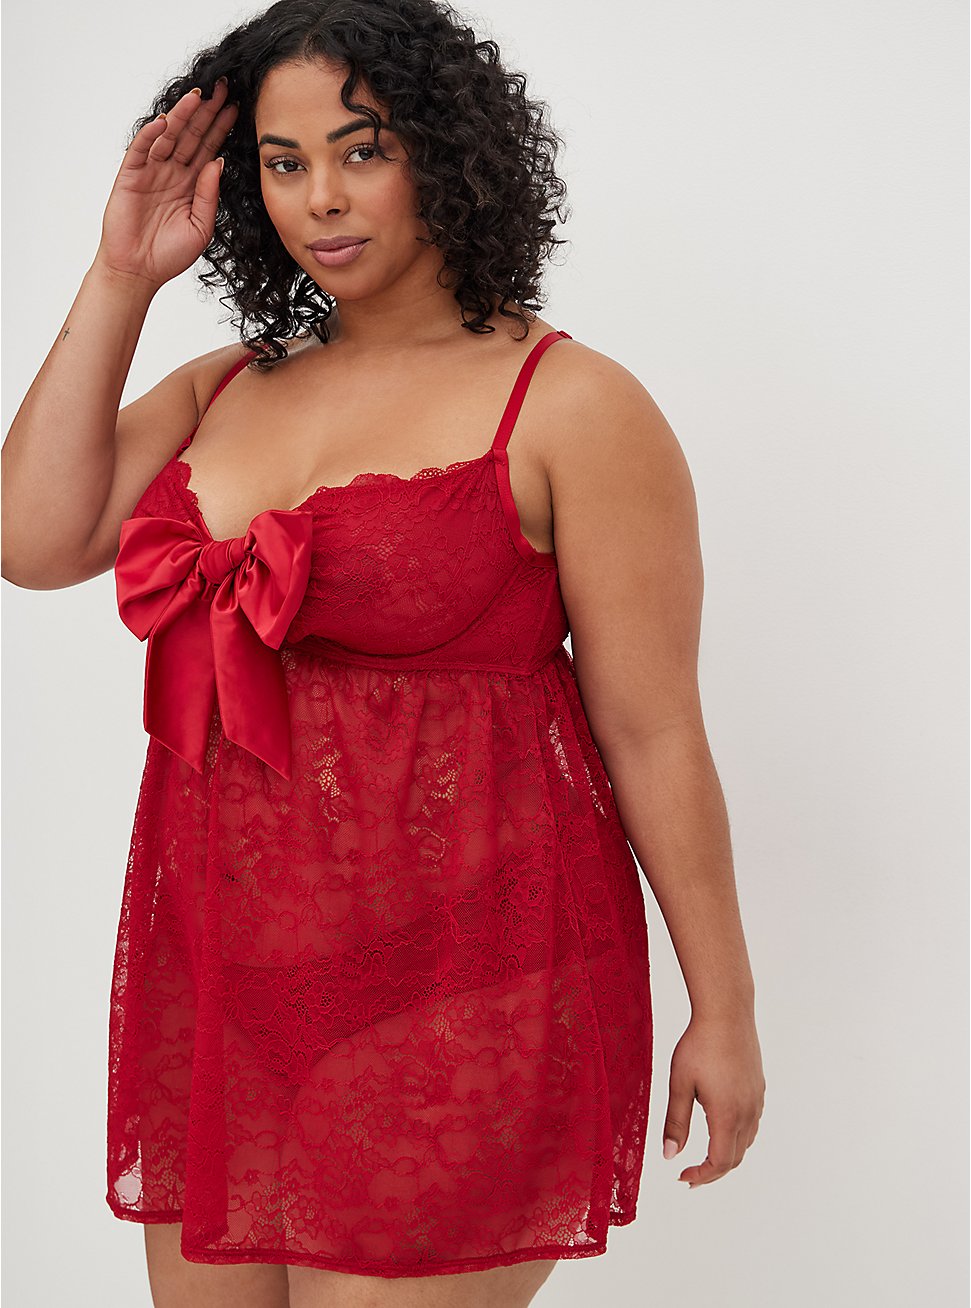 Plus Size Underwire Babydoll Top - Lace & Bow Red, JESTER RED, hi-res